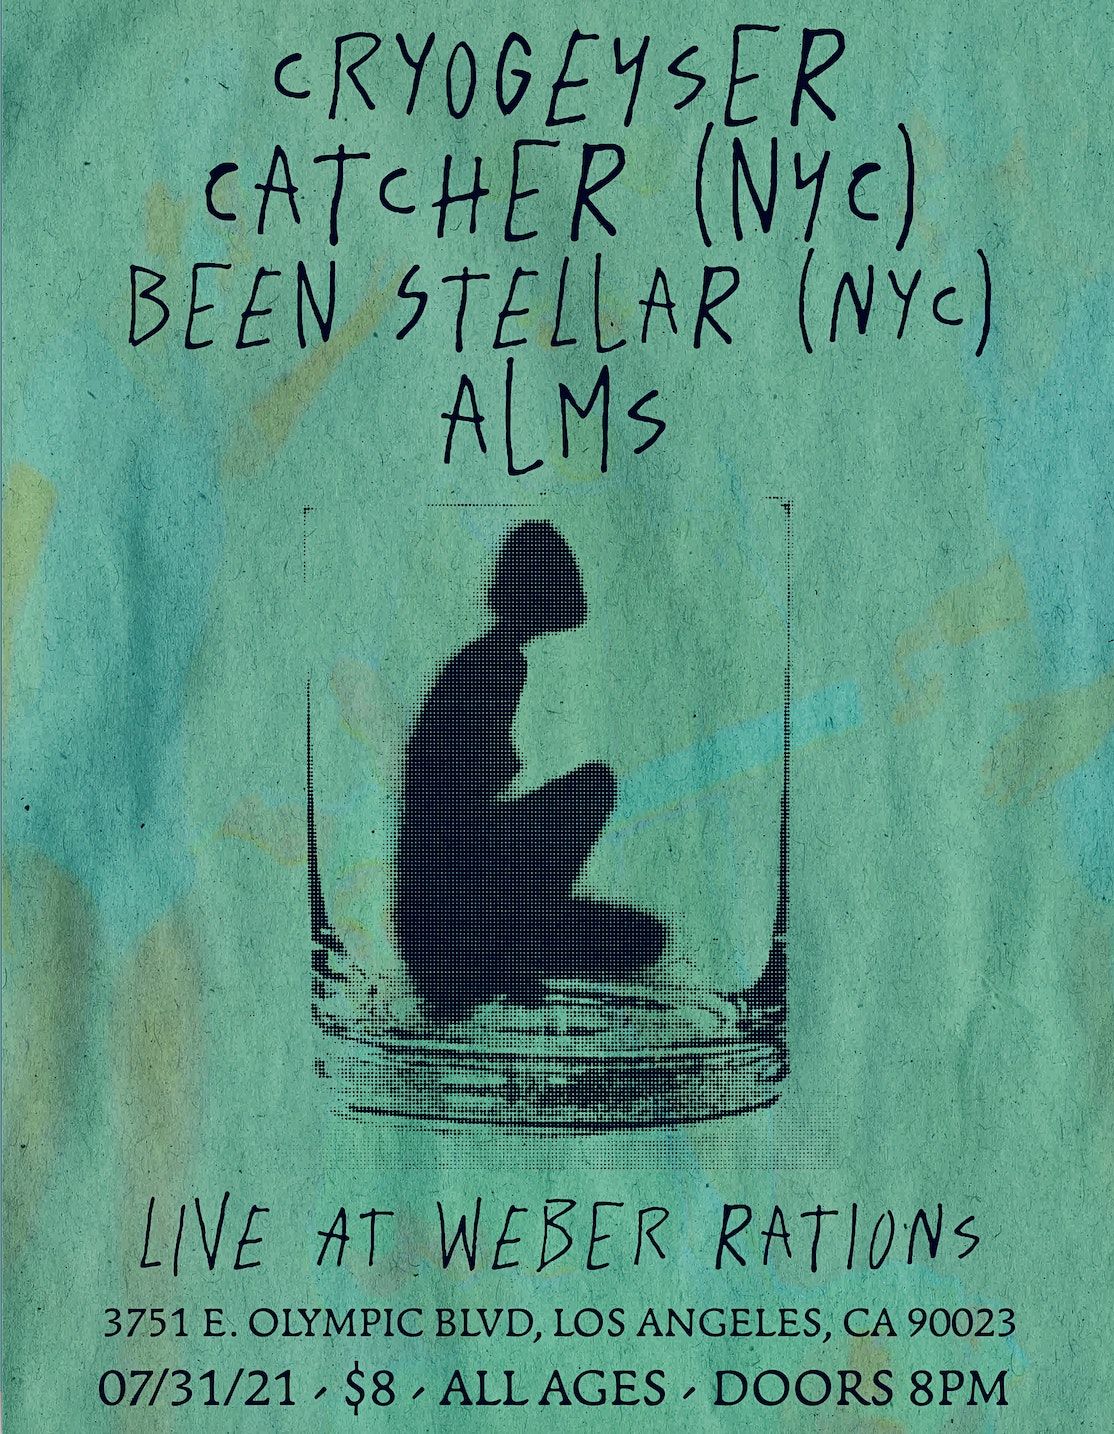 Cryogeyser, Catcher (NYC), Been Stellar (NYC), Alms - Live at Baader House